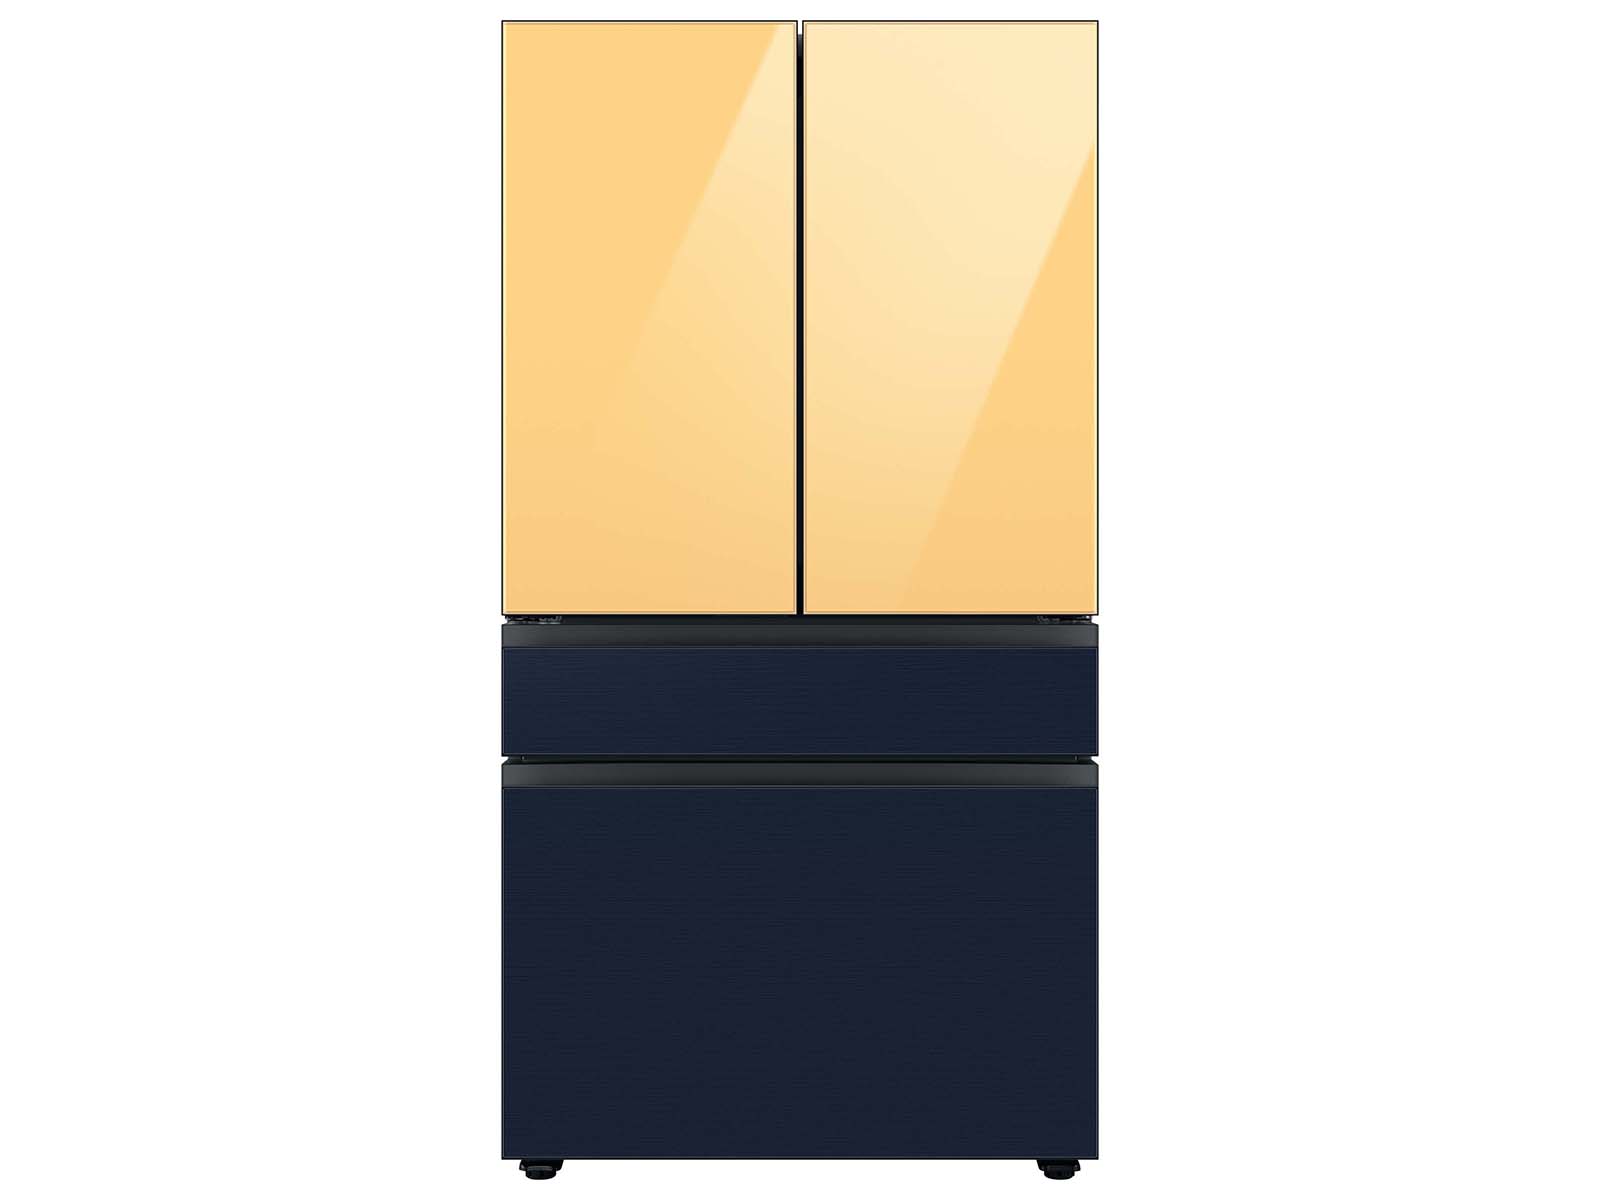 Samsung Bespoke 4-Door French Door Refrigerator (23 cu. ft.) with Customizable Door Panel Colors and Beverage Center™ in Sunrise Yellow Glass Top in White Glass Middle, and Morning Blue Glass Bottom Panels